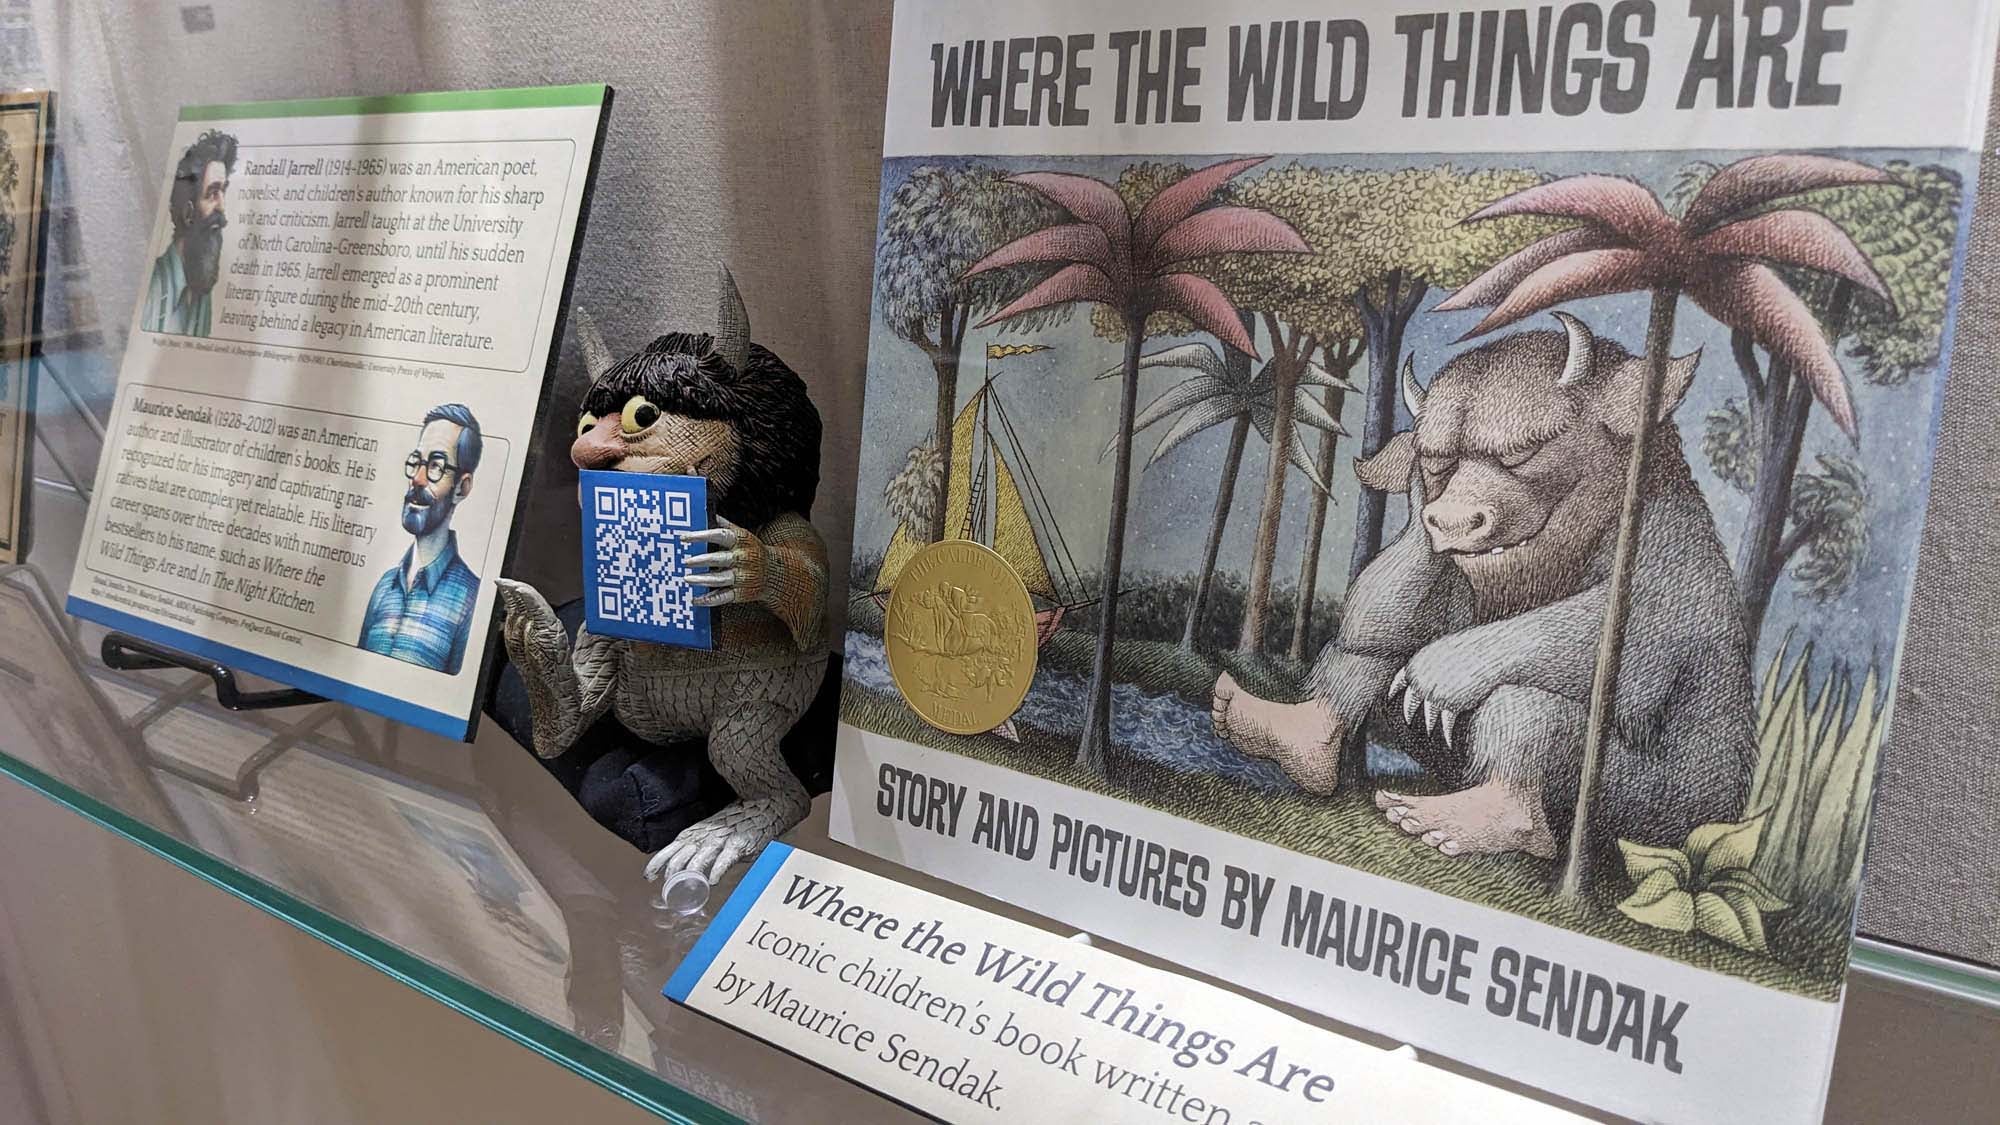 Picture of the book Where the Wild Things Are and a figurine as displayed in the exhibit.